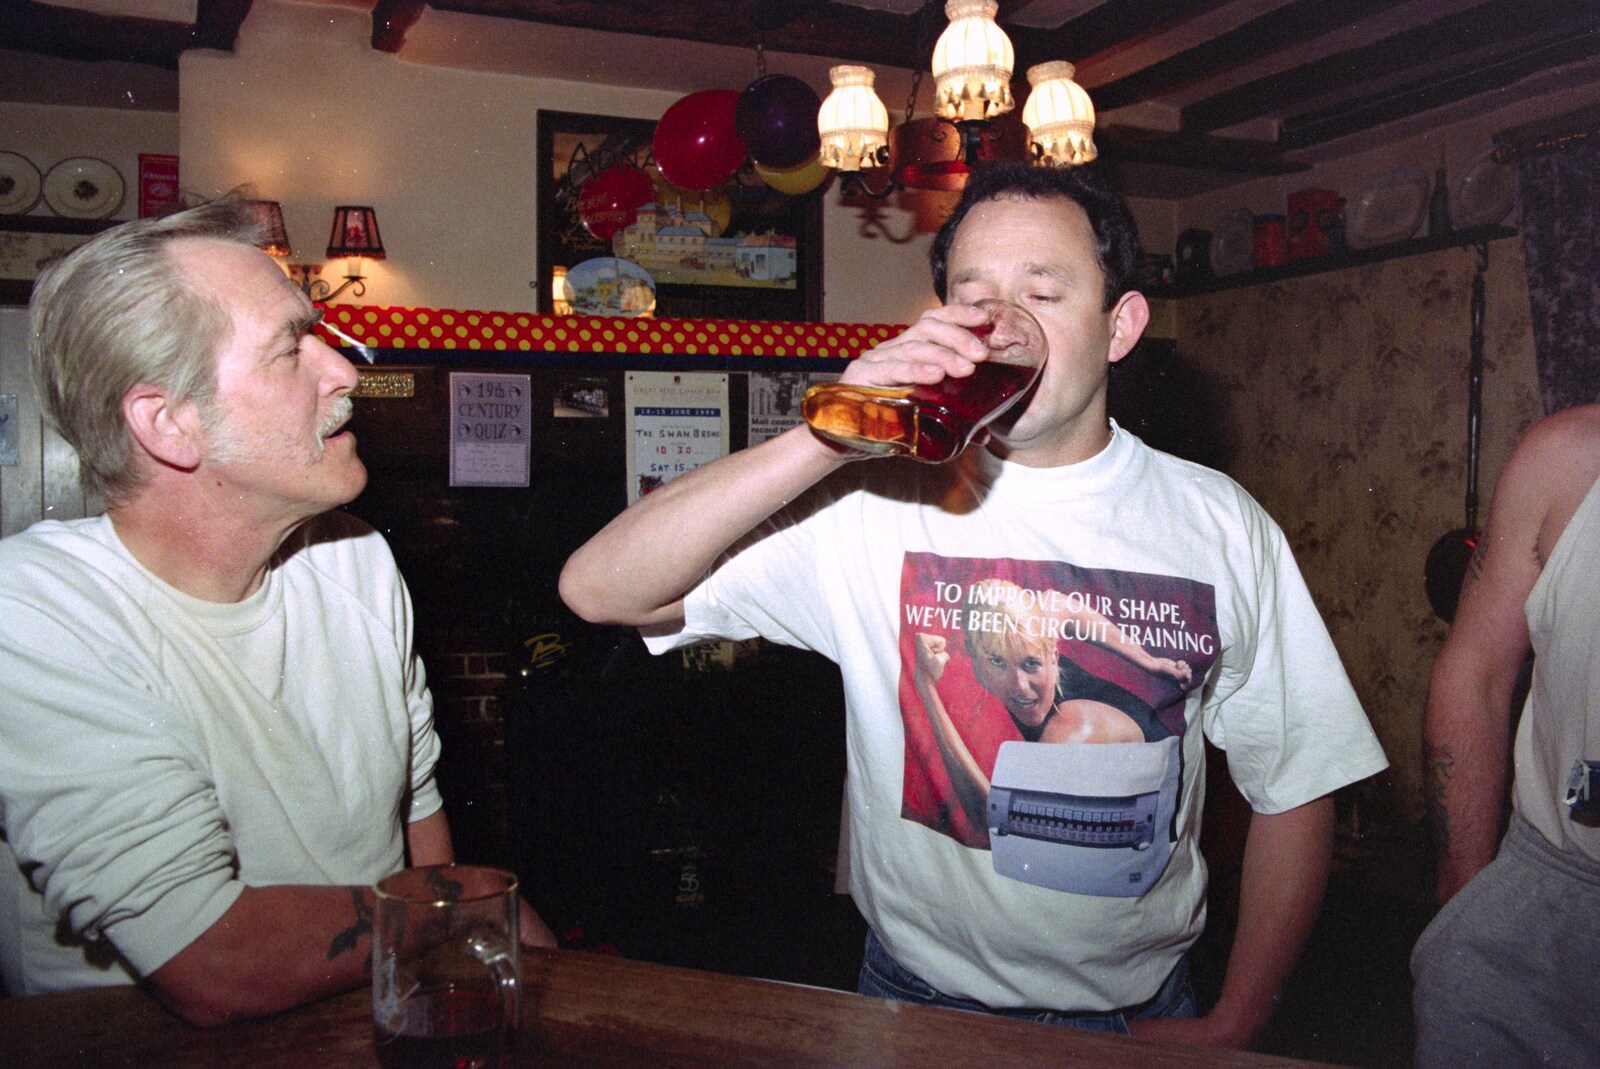 DH has a go on the boot from A Welly Boot of Beer at the Swan Inn, Brome, Suffolk - 15th June 1996